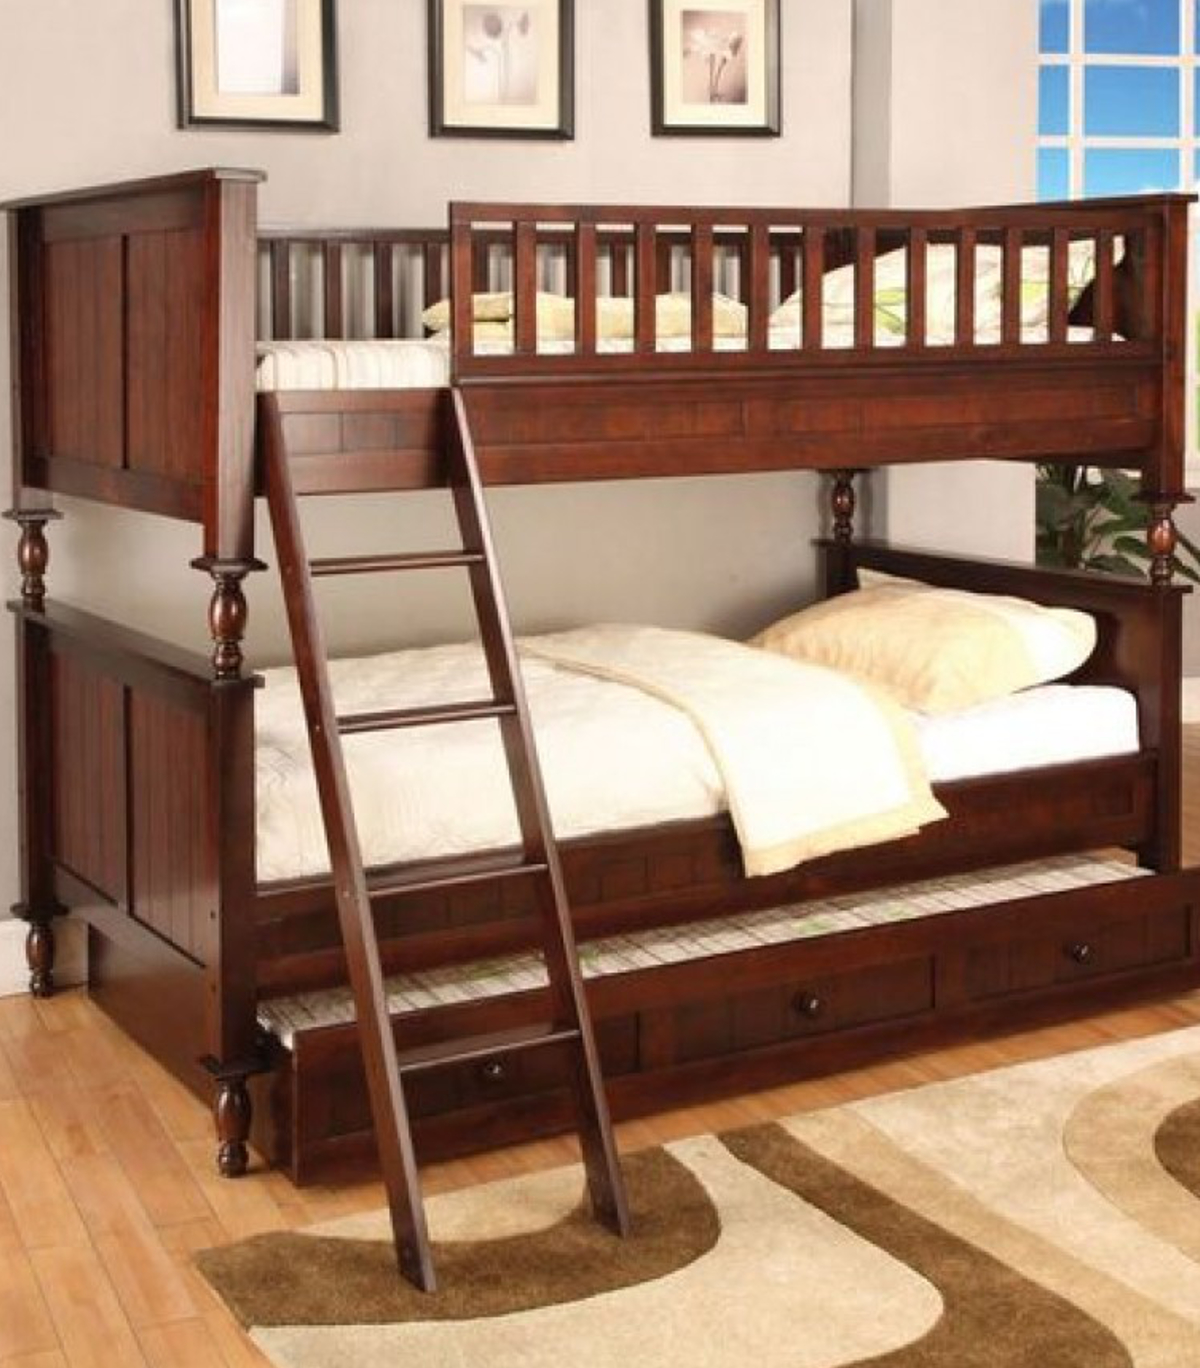 Stalion wooden bunk bed